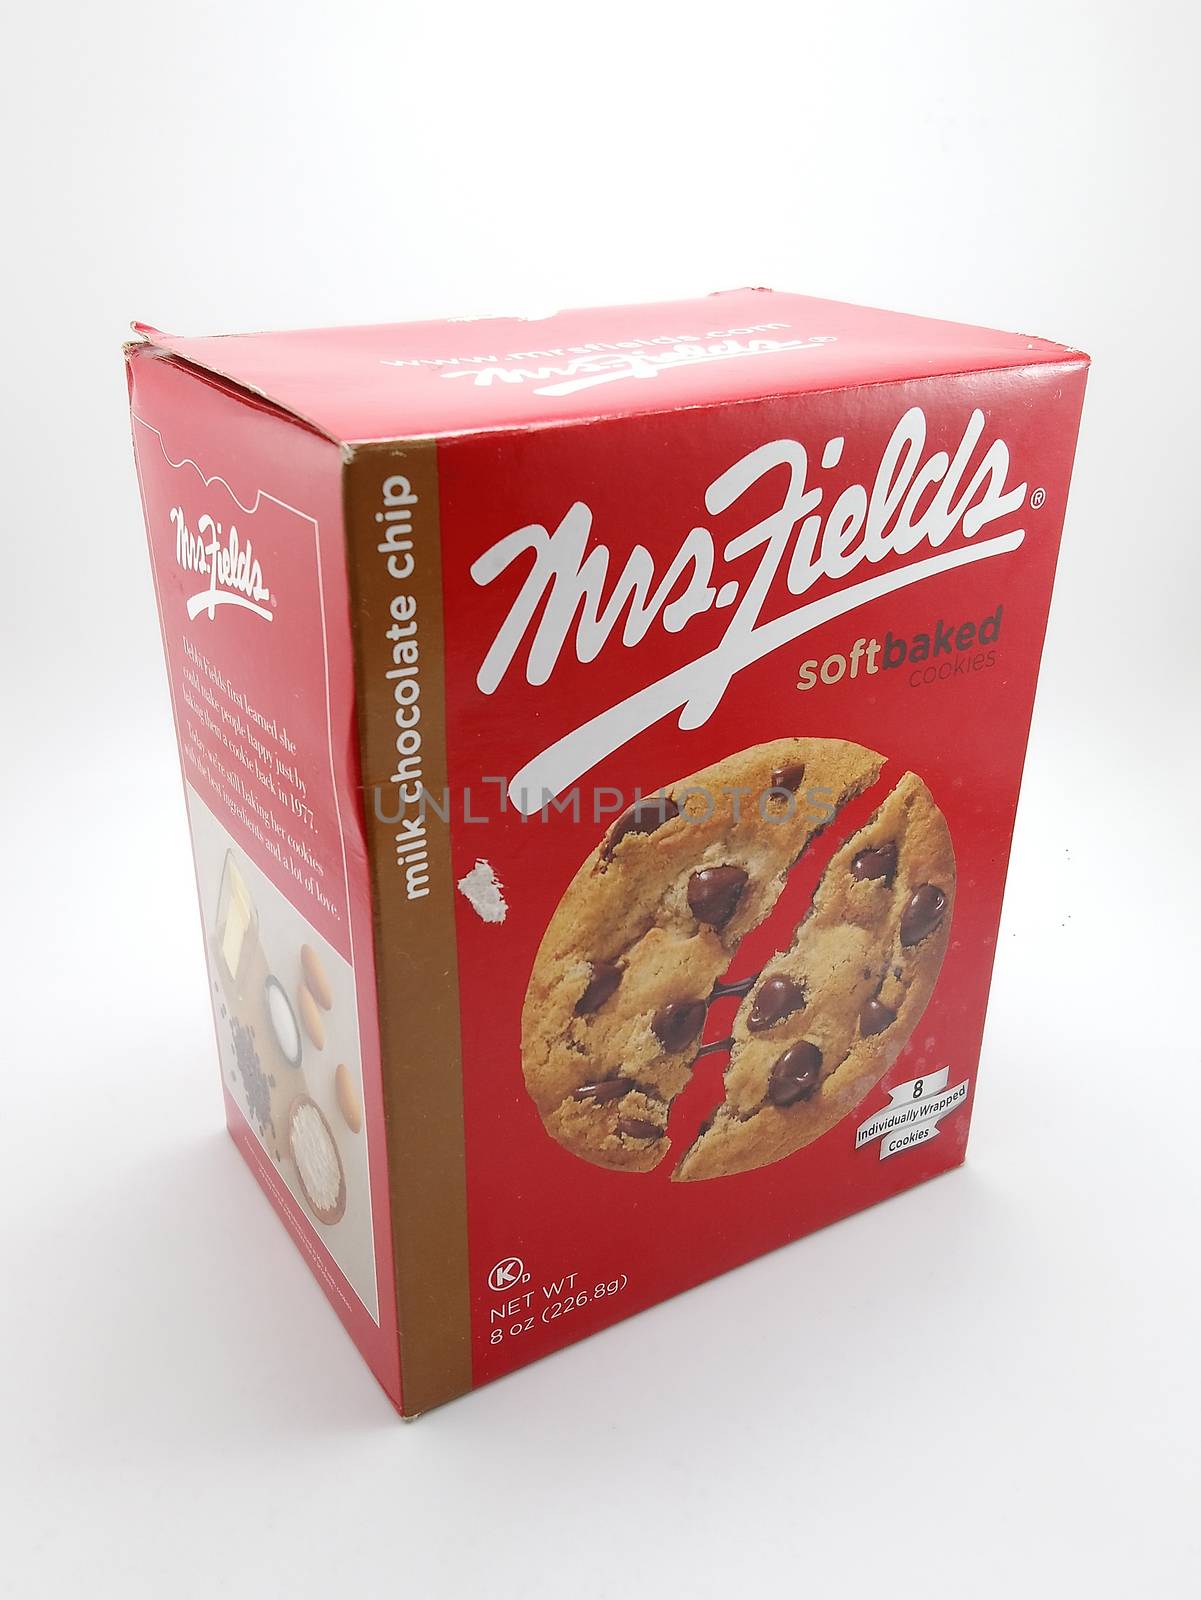 Mrs Fields soft baked cookies milk chocolate chip box in Manila, by imwaltersy